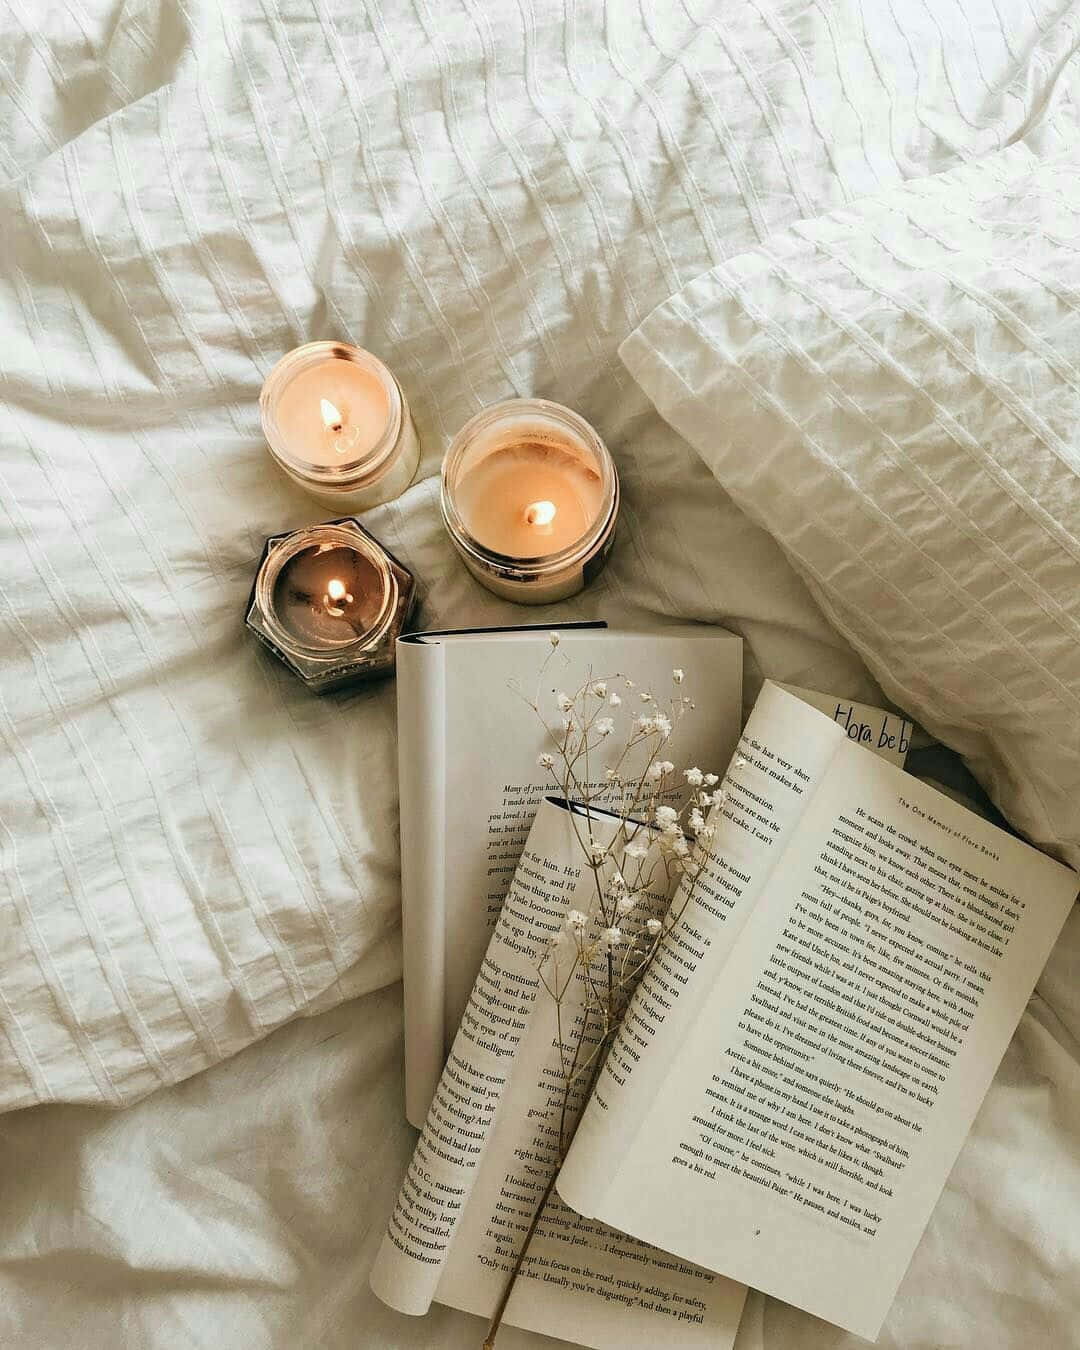 Download A Book, Candles, And Flowers On A Bed